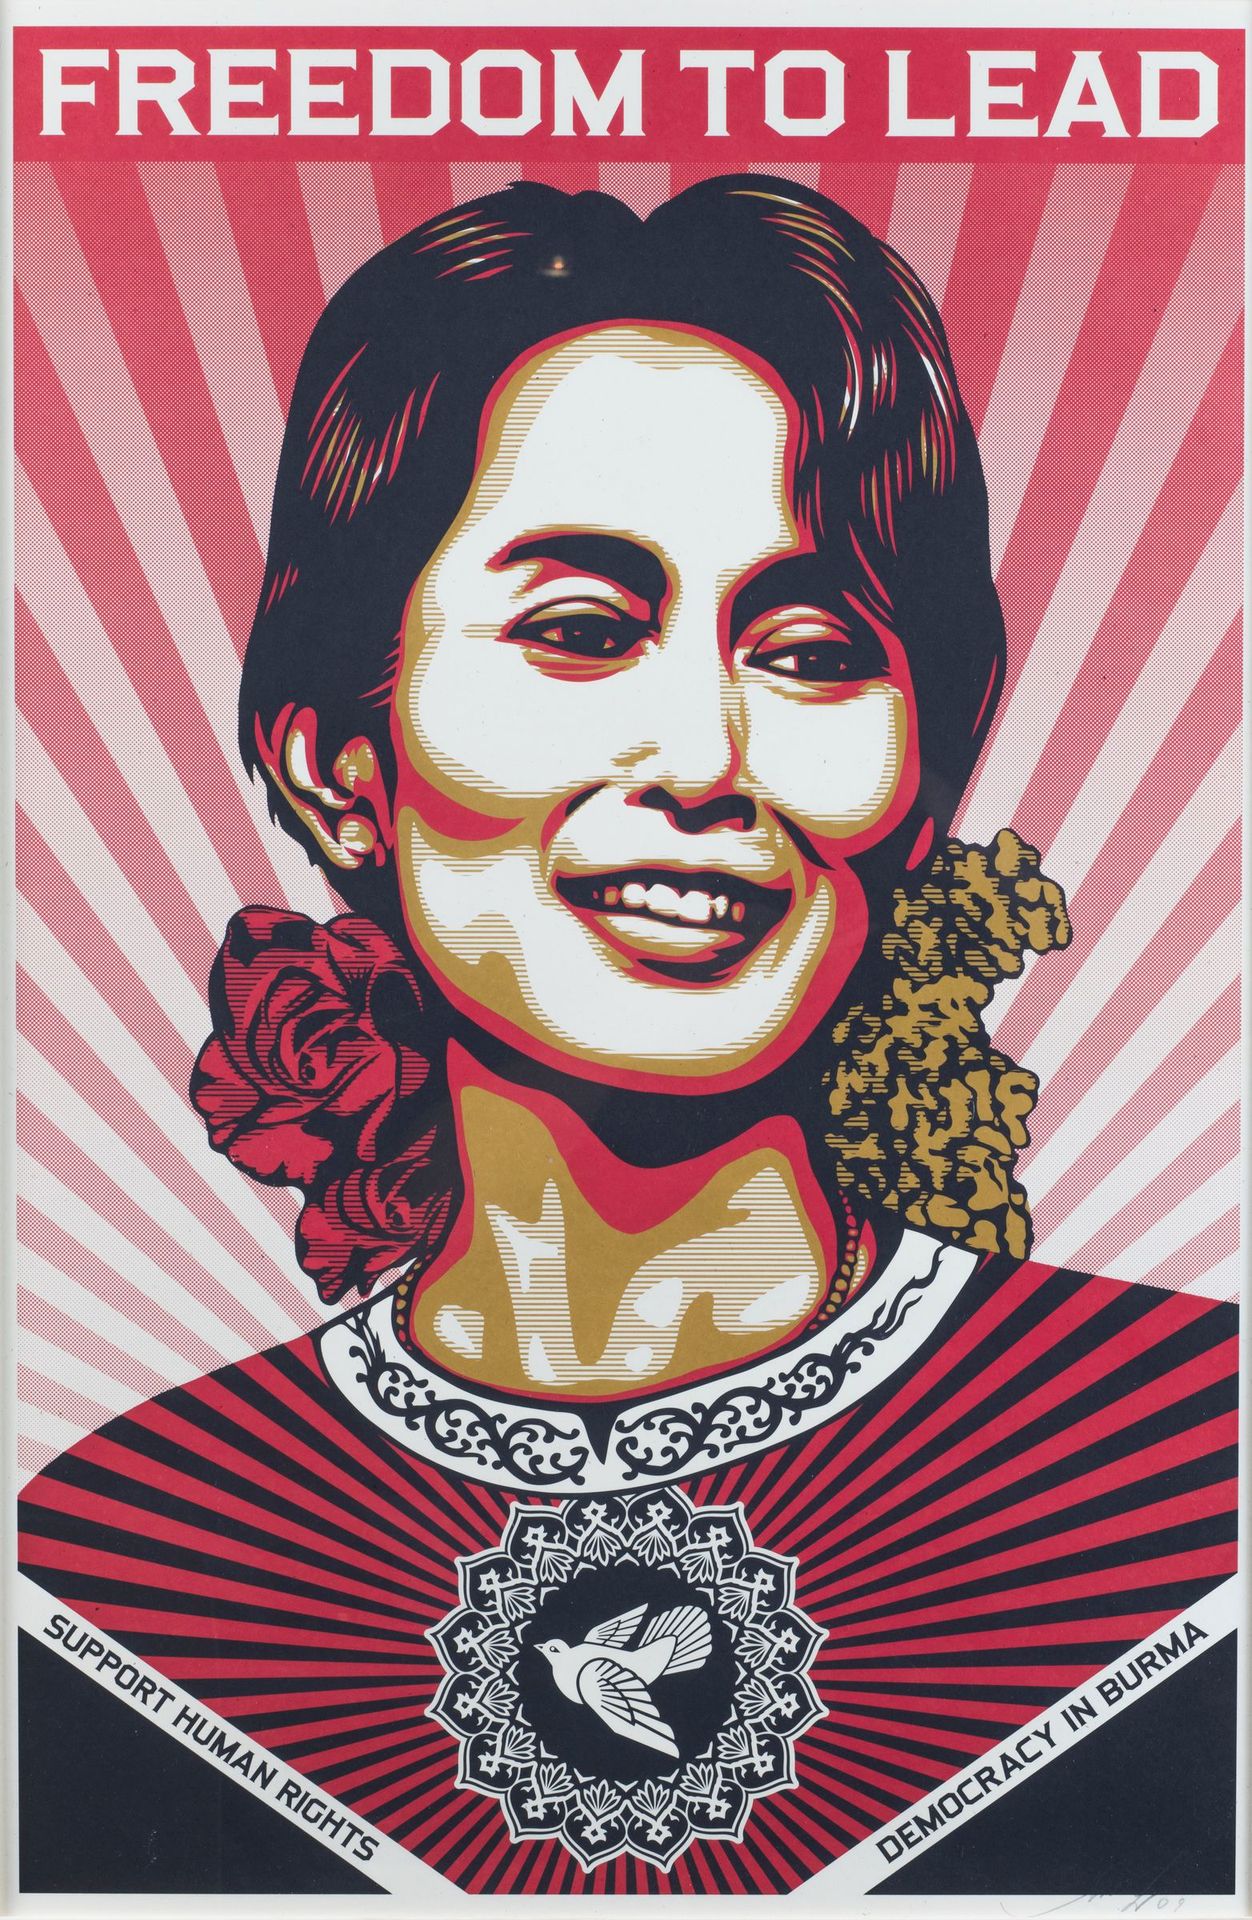 Null OBEY

Freedom To Lead Aung San Suu Kyi, 2009

Lithographie offset

91x61 cm